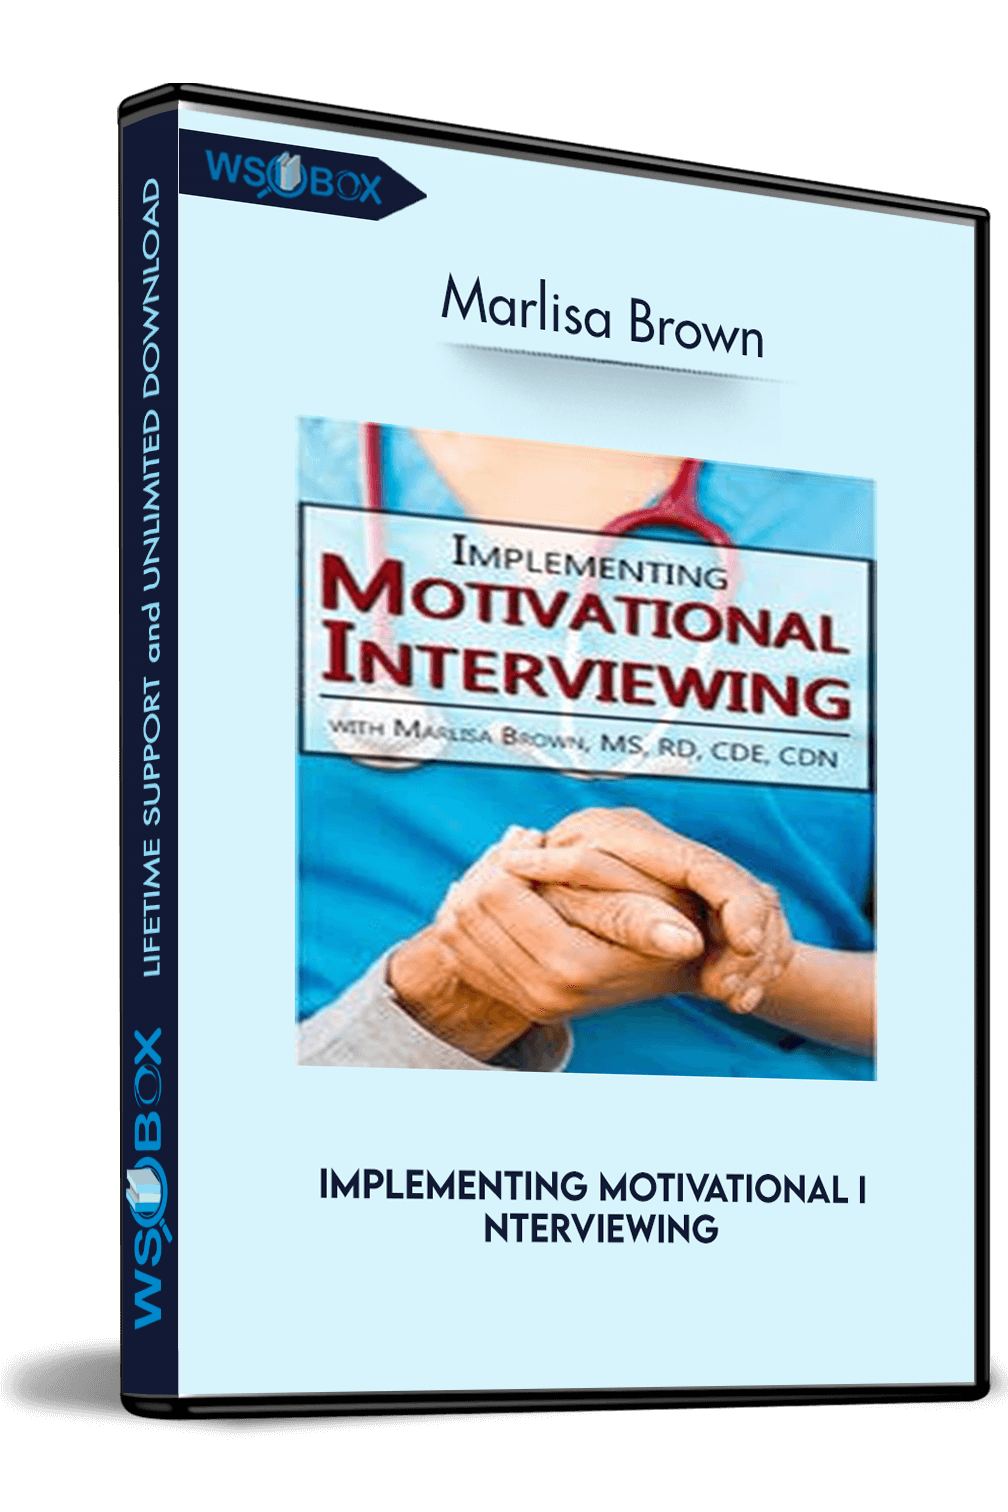 implementing-motivational-interviewing-marlisa-brown